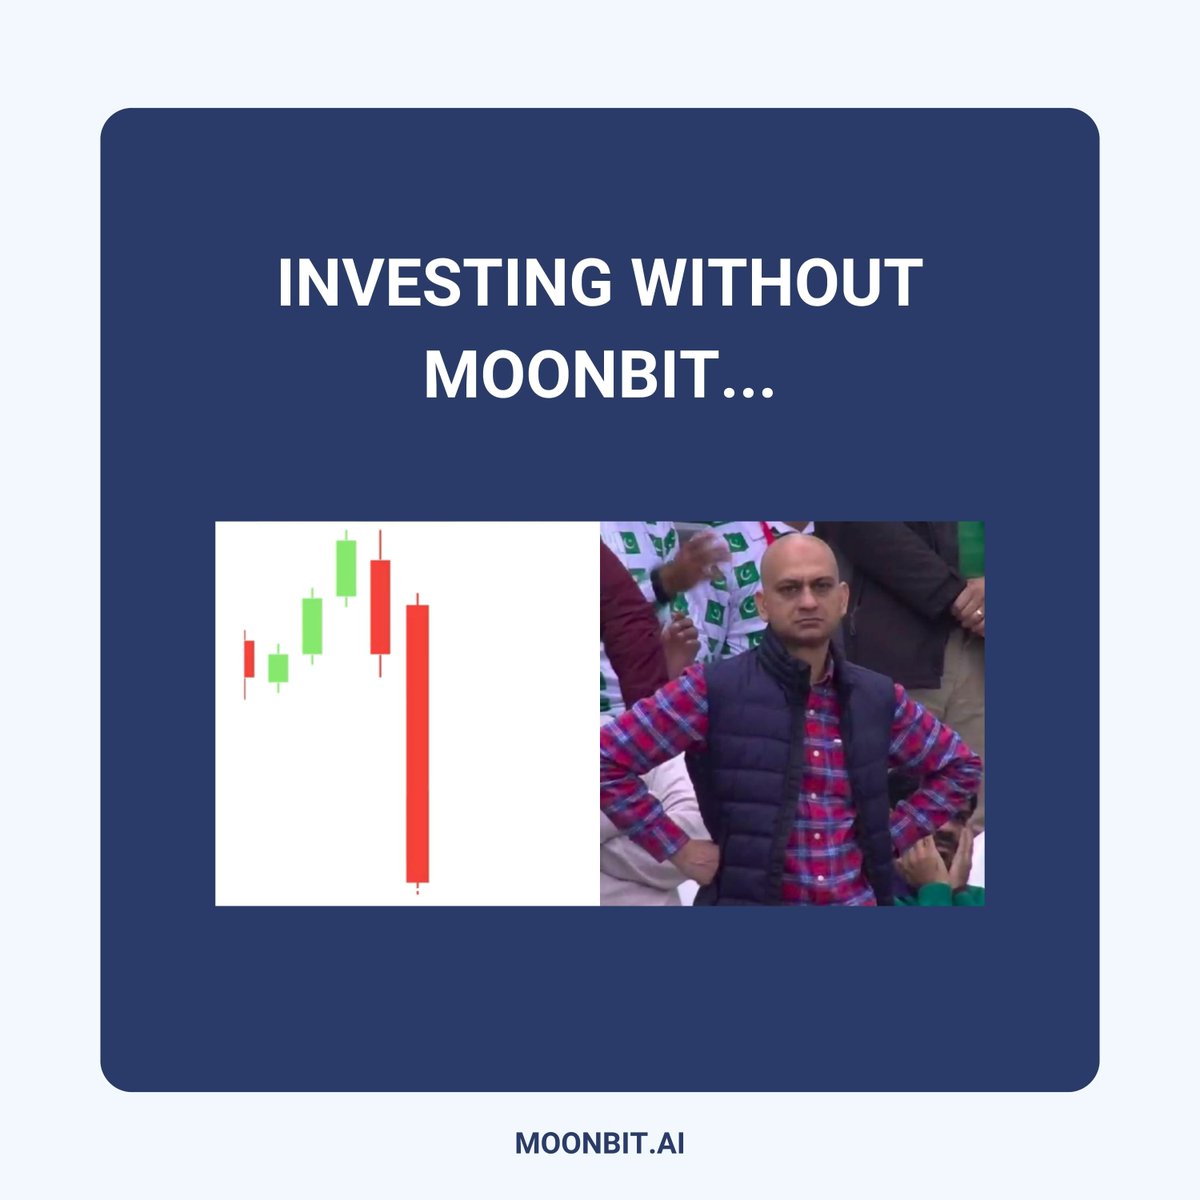 Navigating the crypto world? 🌐
 Trade with confidence with Moonbit! 

Learn how to make informed decisions and ride the crypto tide solo. 💹💪 

#CryptoTradingTips #IndependentInvesting  #InvestingForAll  #MoonbitJourney #GameChanger  #EverydayInvestor